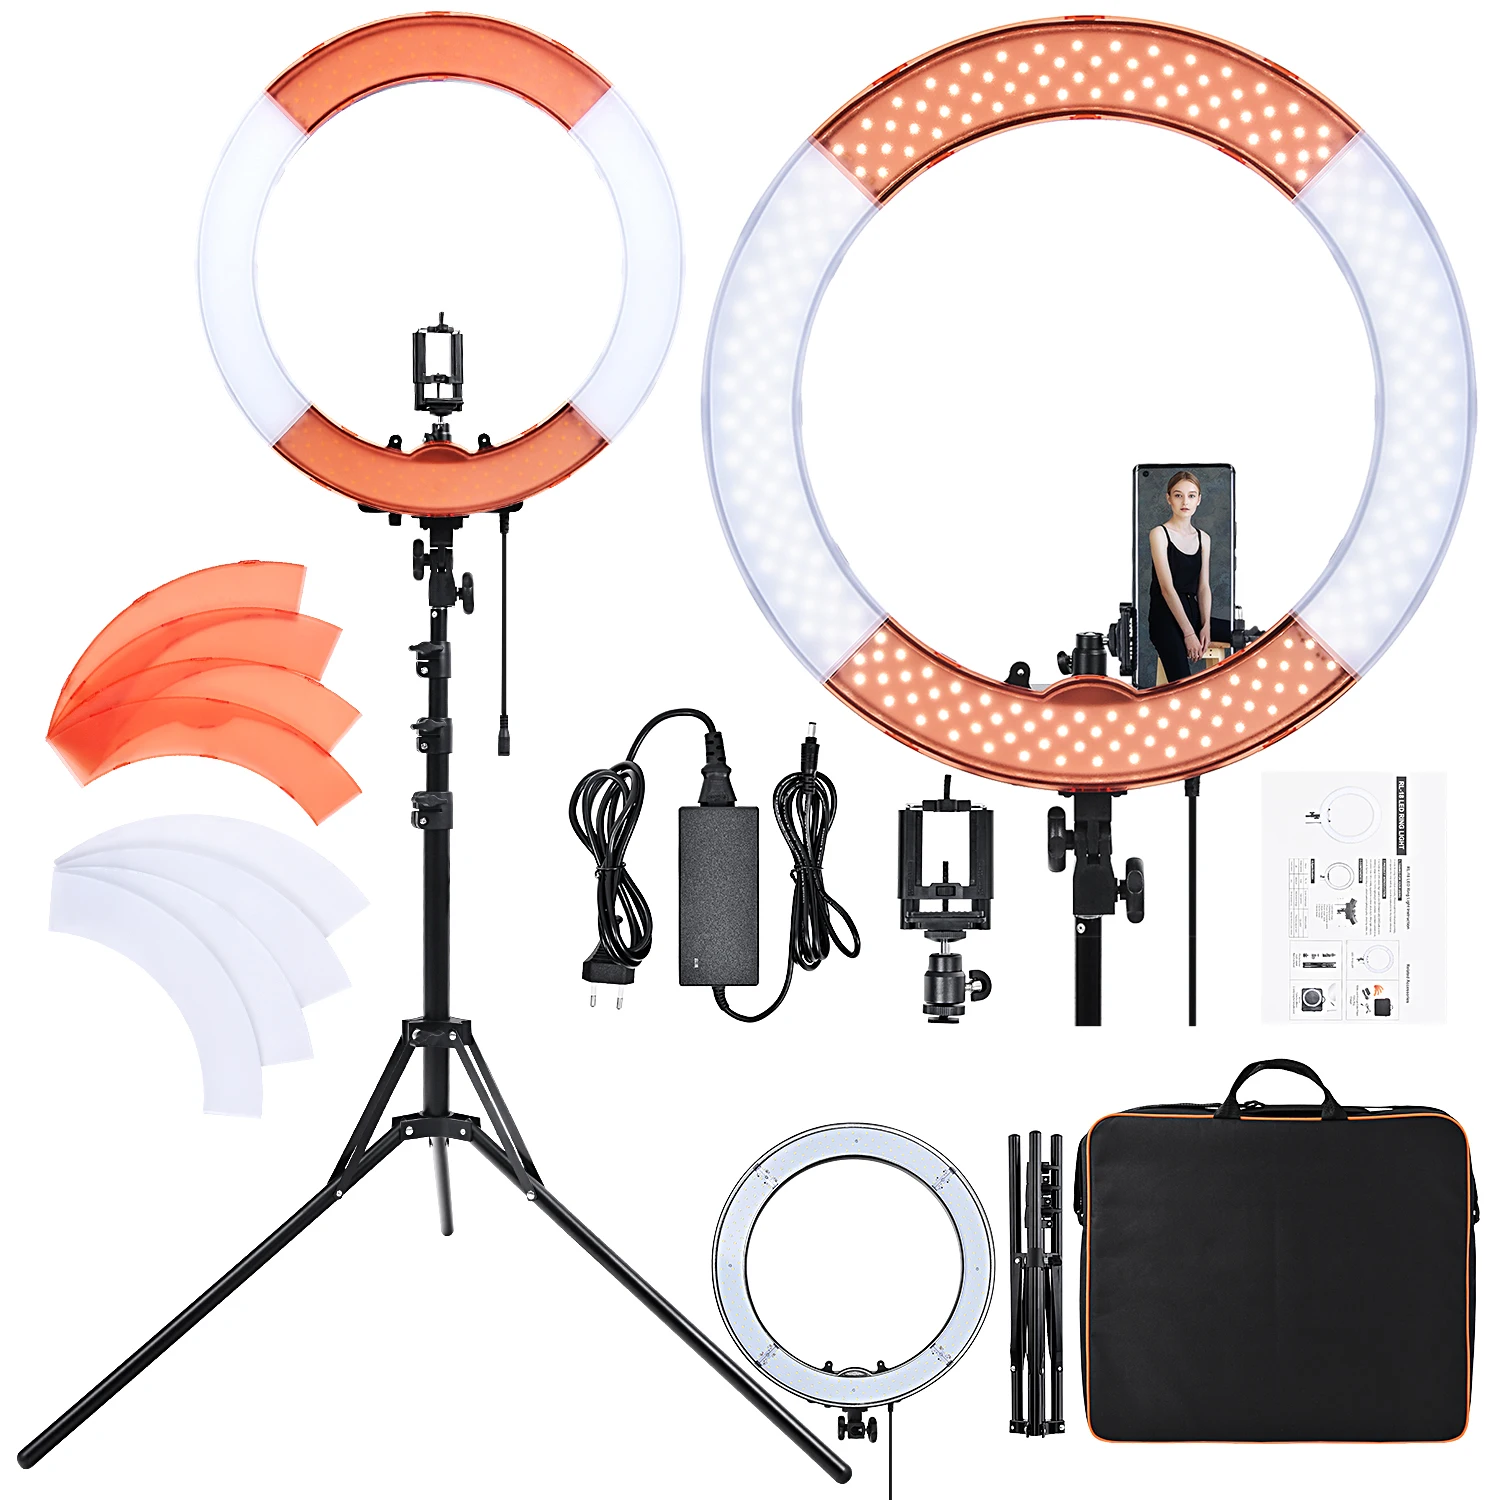 

FOSOTO Ring Light Kit:18"/48cm Outer 55W 5500K Dimmable LED Ring Light, Light Stand, Carrying Bag for Camera,Smartphone,YouTube, Black